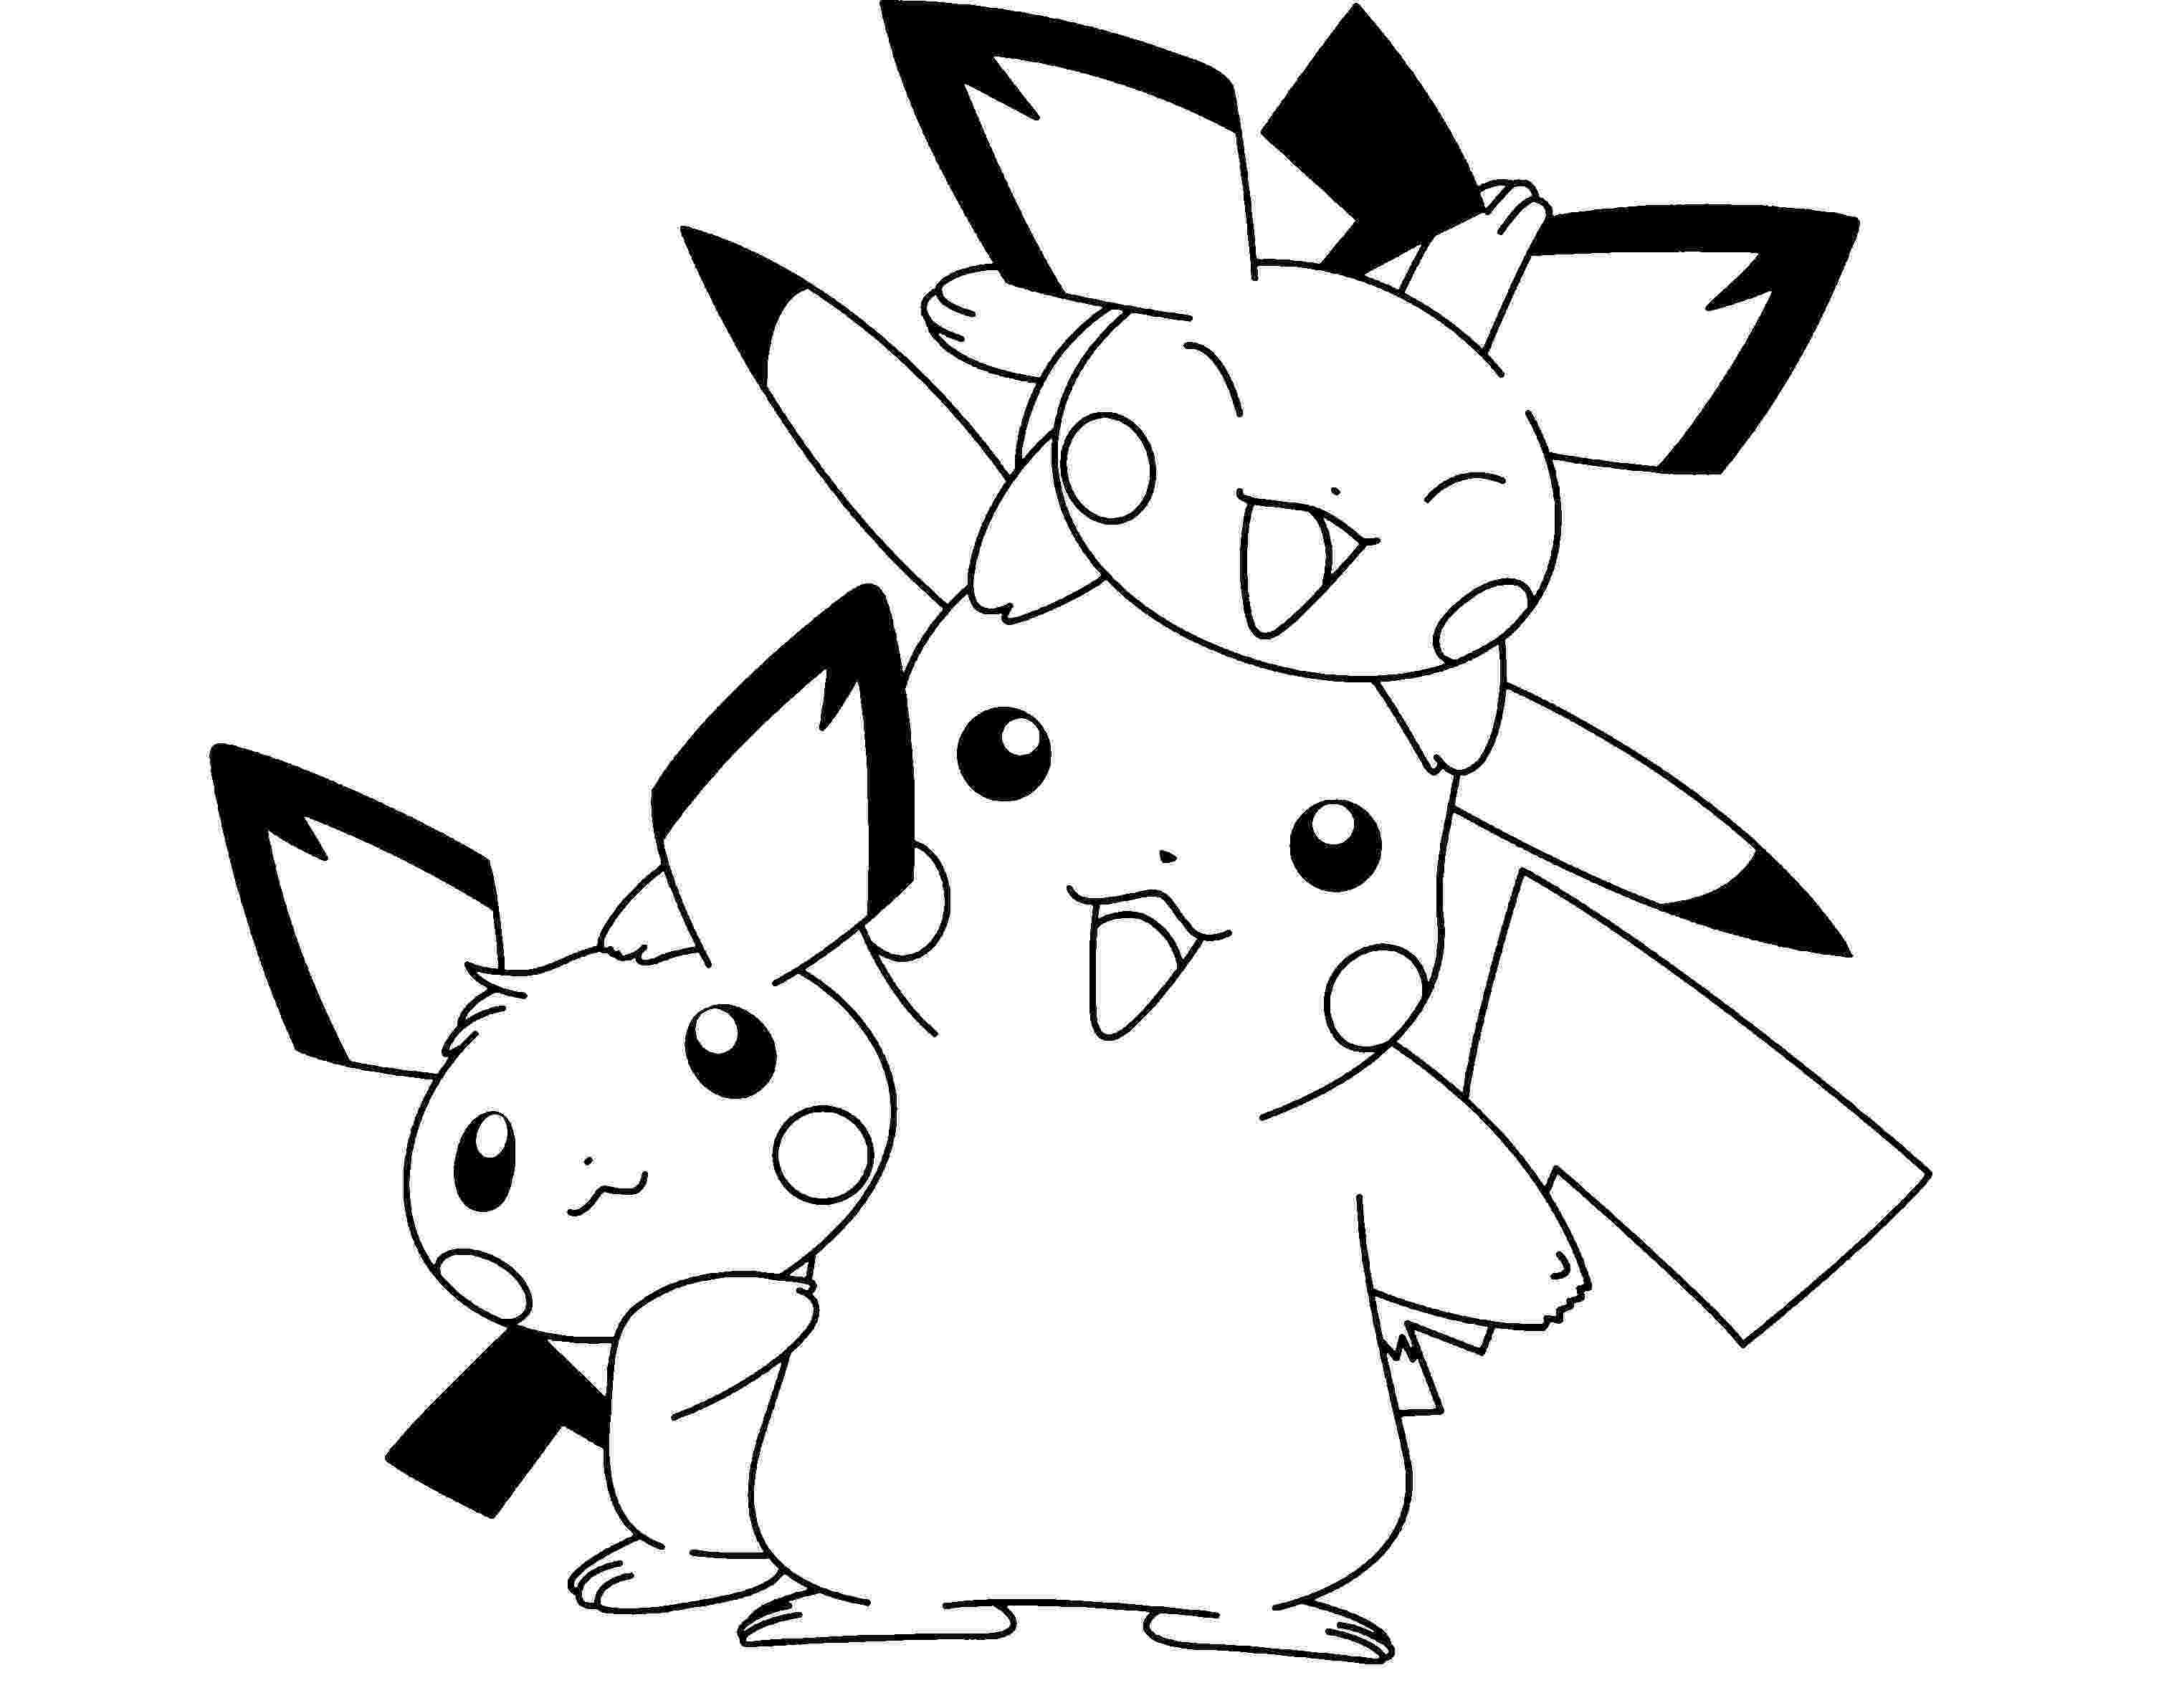 coloring pages for pokemon pokémon go pikachu waving super coloring pokemon coloring pages pokemon for 